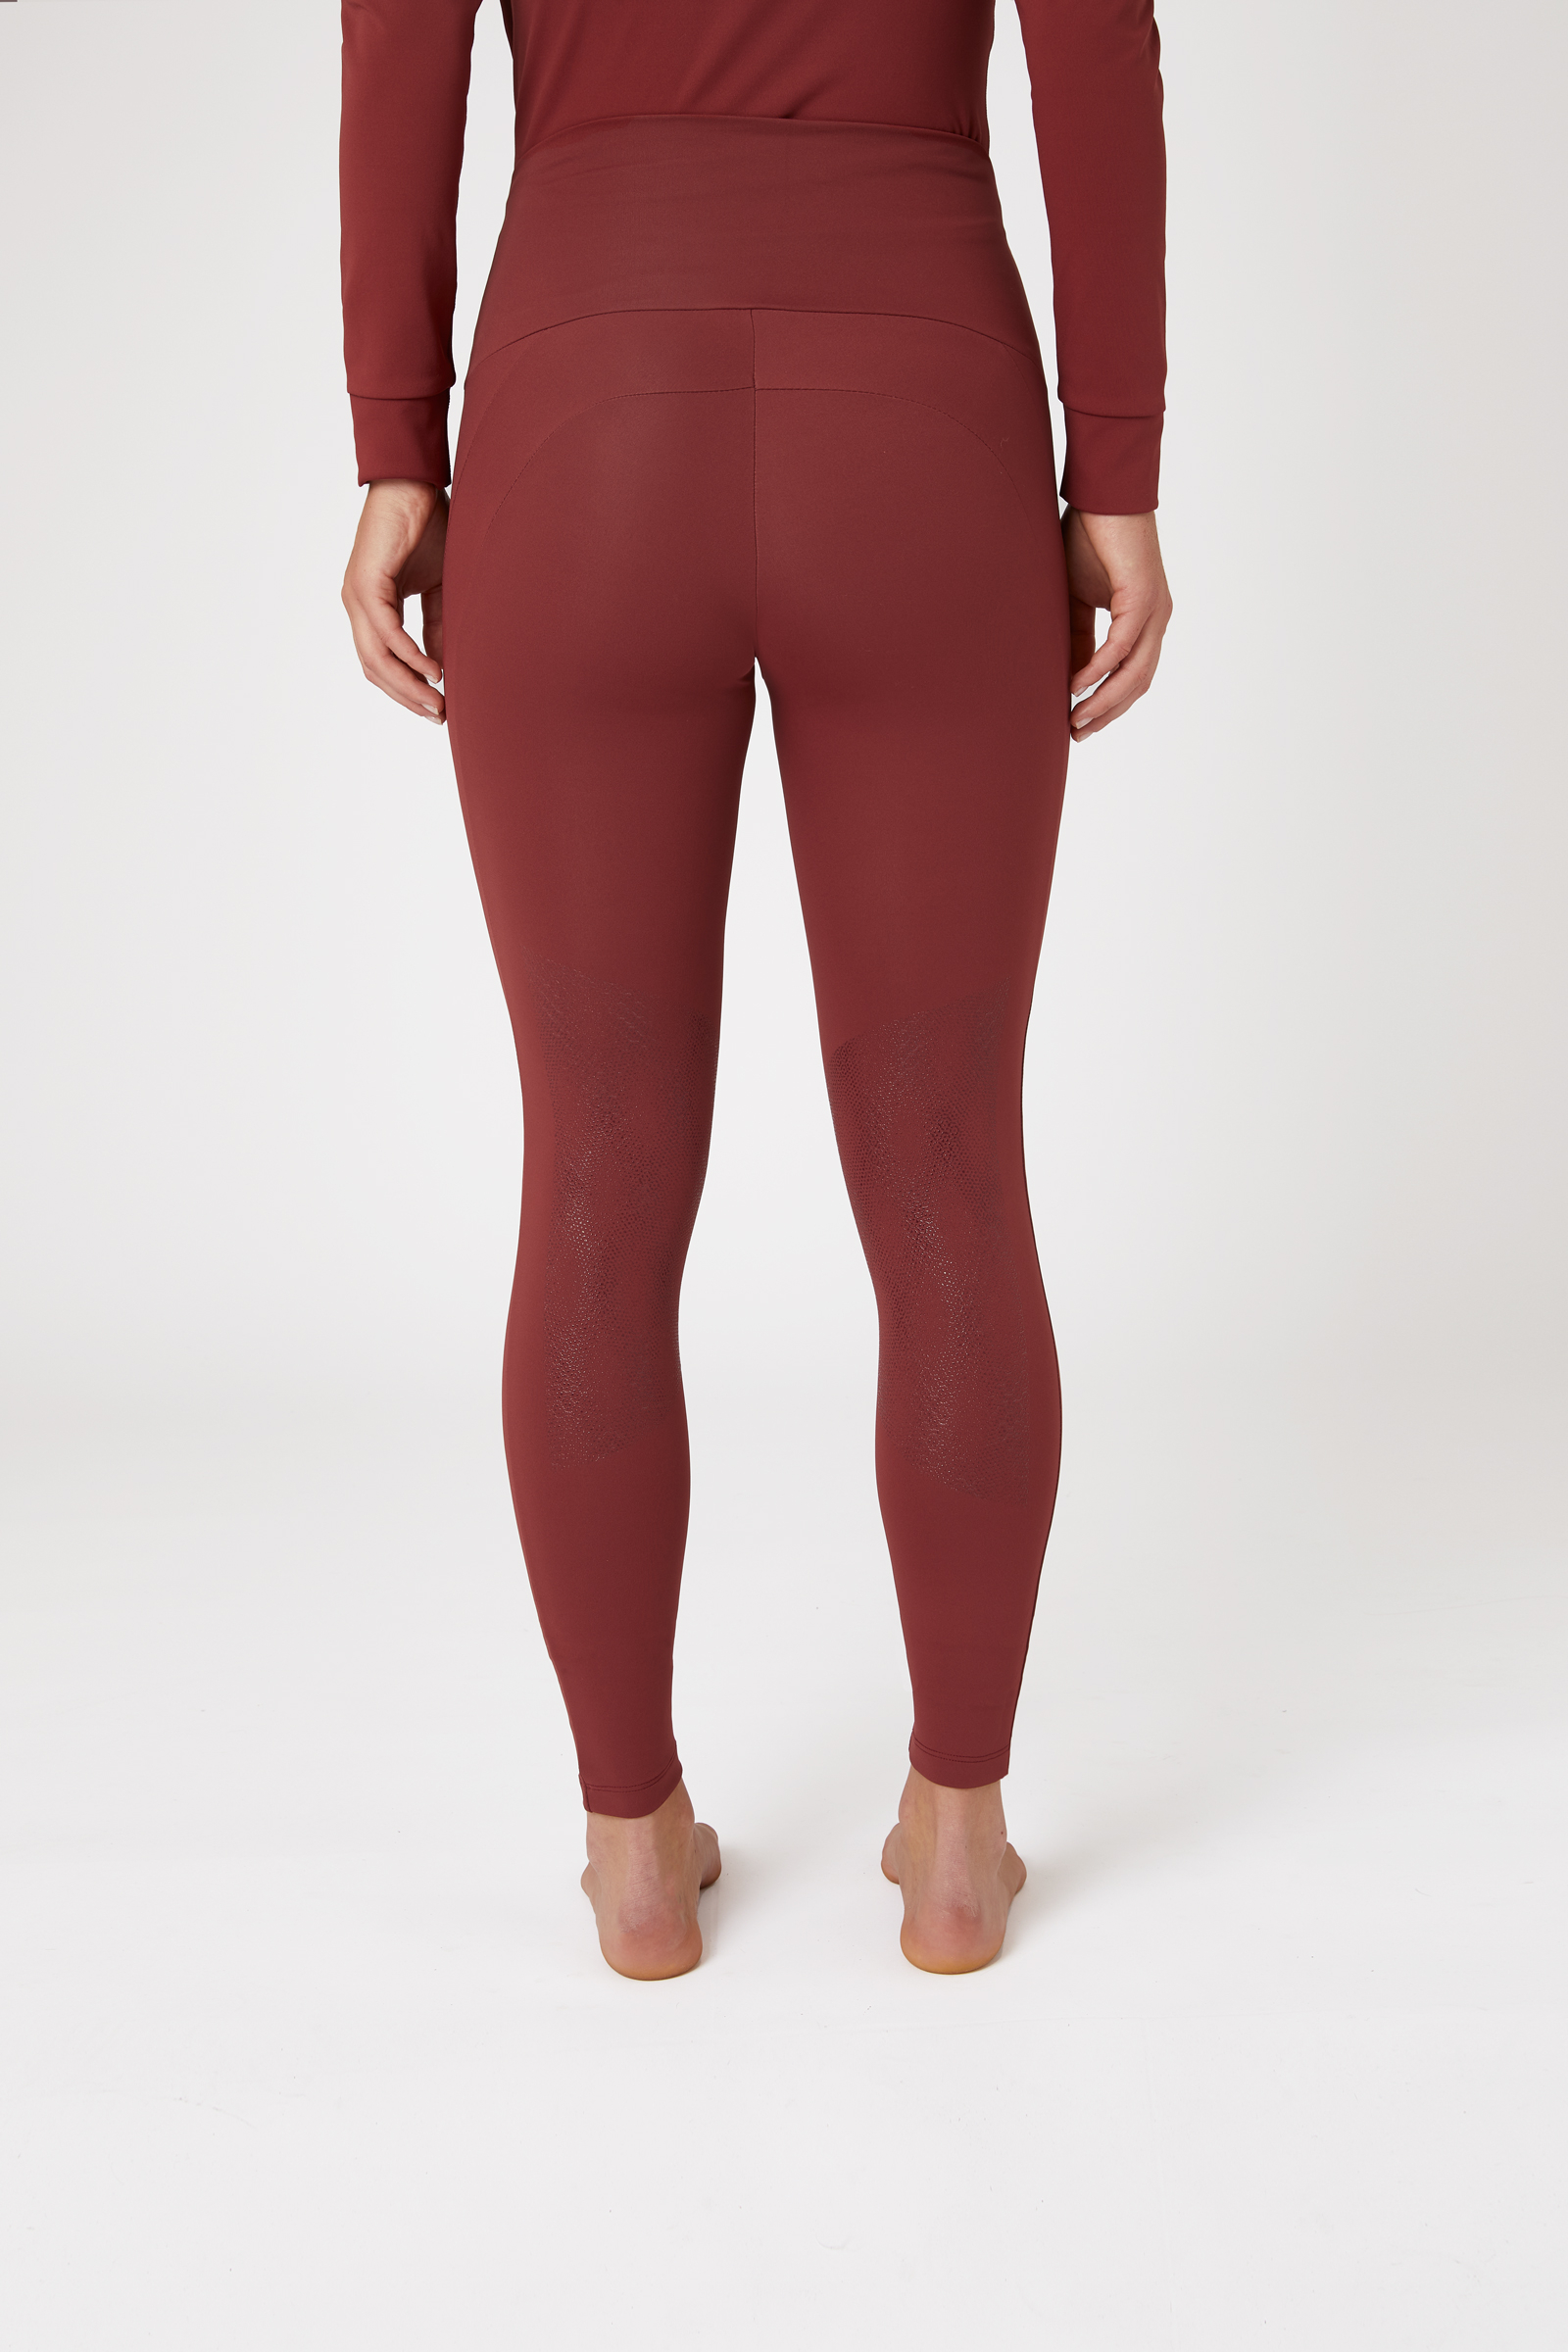 Wine Riding Tights® / Leggings® With Full Seat and Deep Phone Pocket -  LuxeEquine